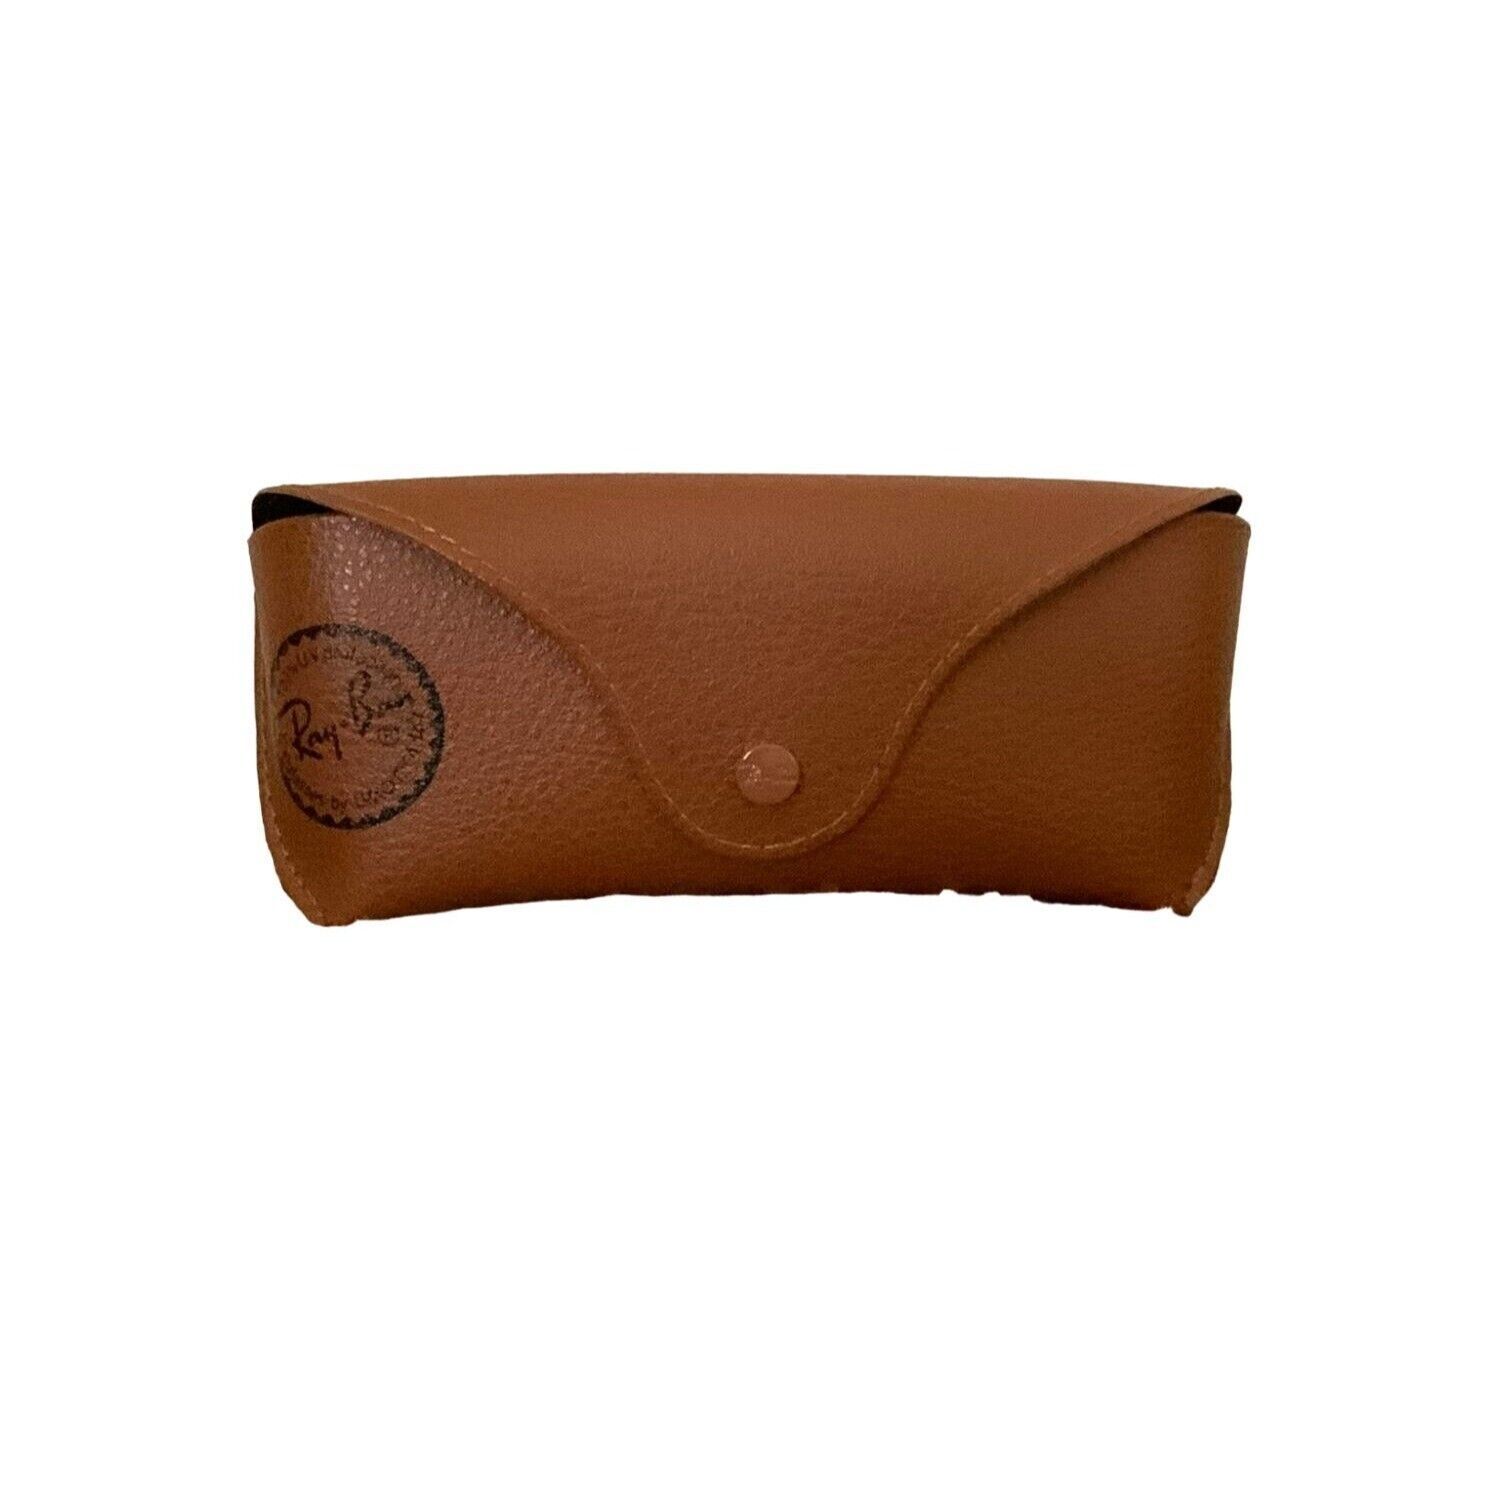 Primary image for Ray-Ban replacement case SUNGLASS CASE Pebbled Leatherette Brown